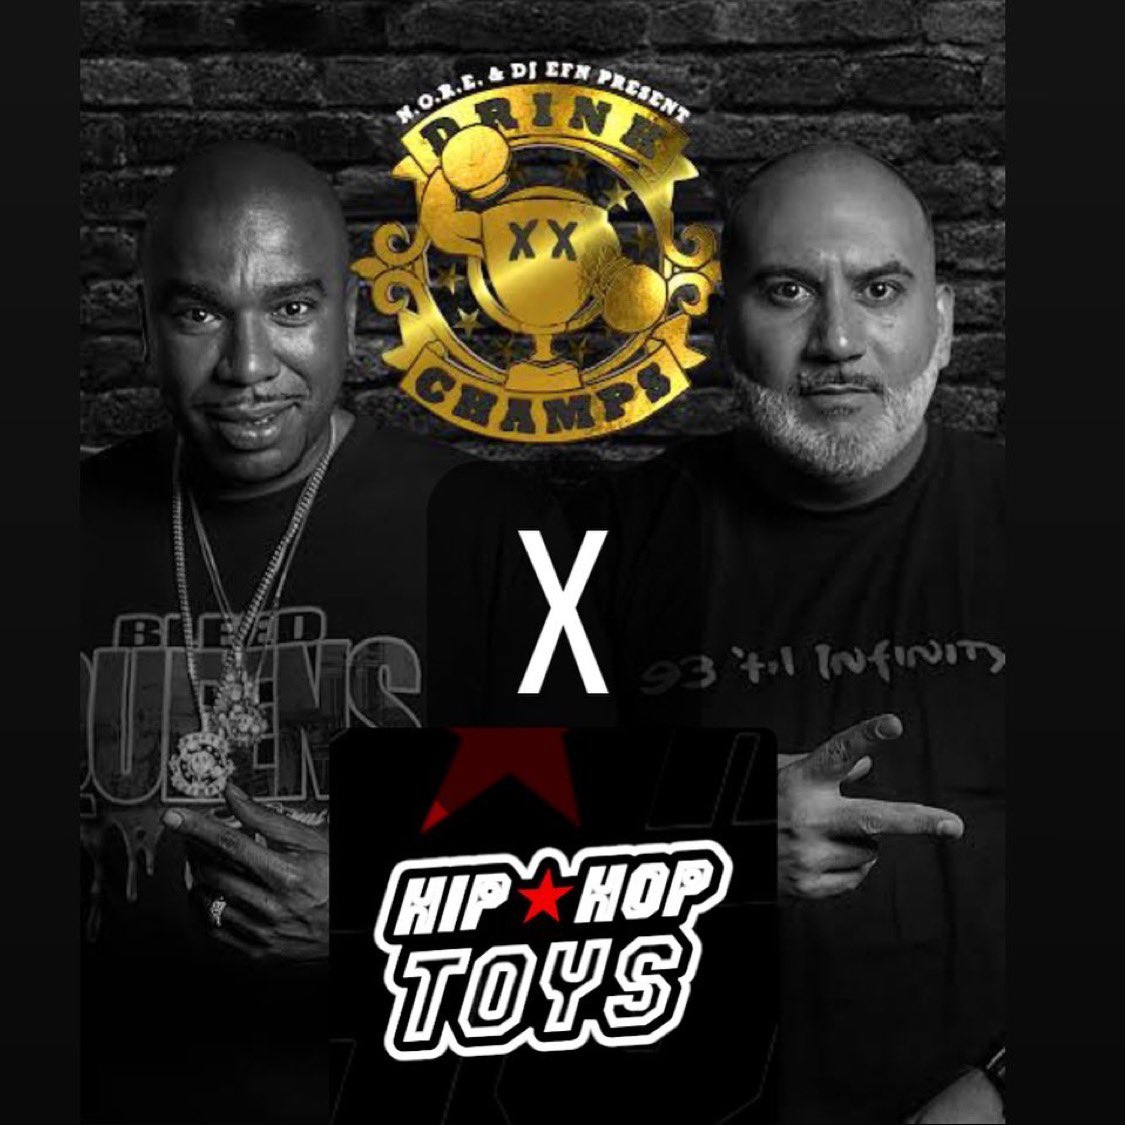 Check out this weeks episode of @drinkchamps to peep the upcoming HipHopToys x Drink Champs 3.75” Action Figure set with of the champs!

Stay tuned…

#hiphoptoys #sureshot22 #drinkchamps #hiphop #hiphopcollectables #raptoys